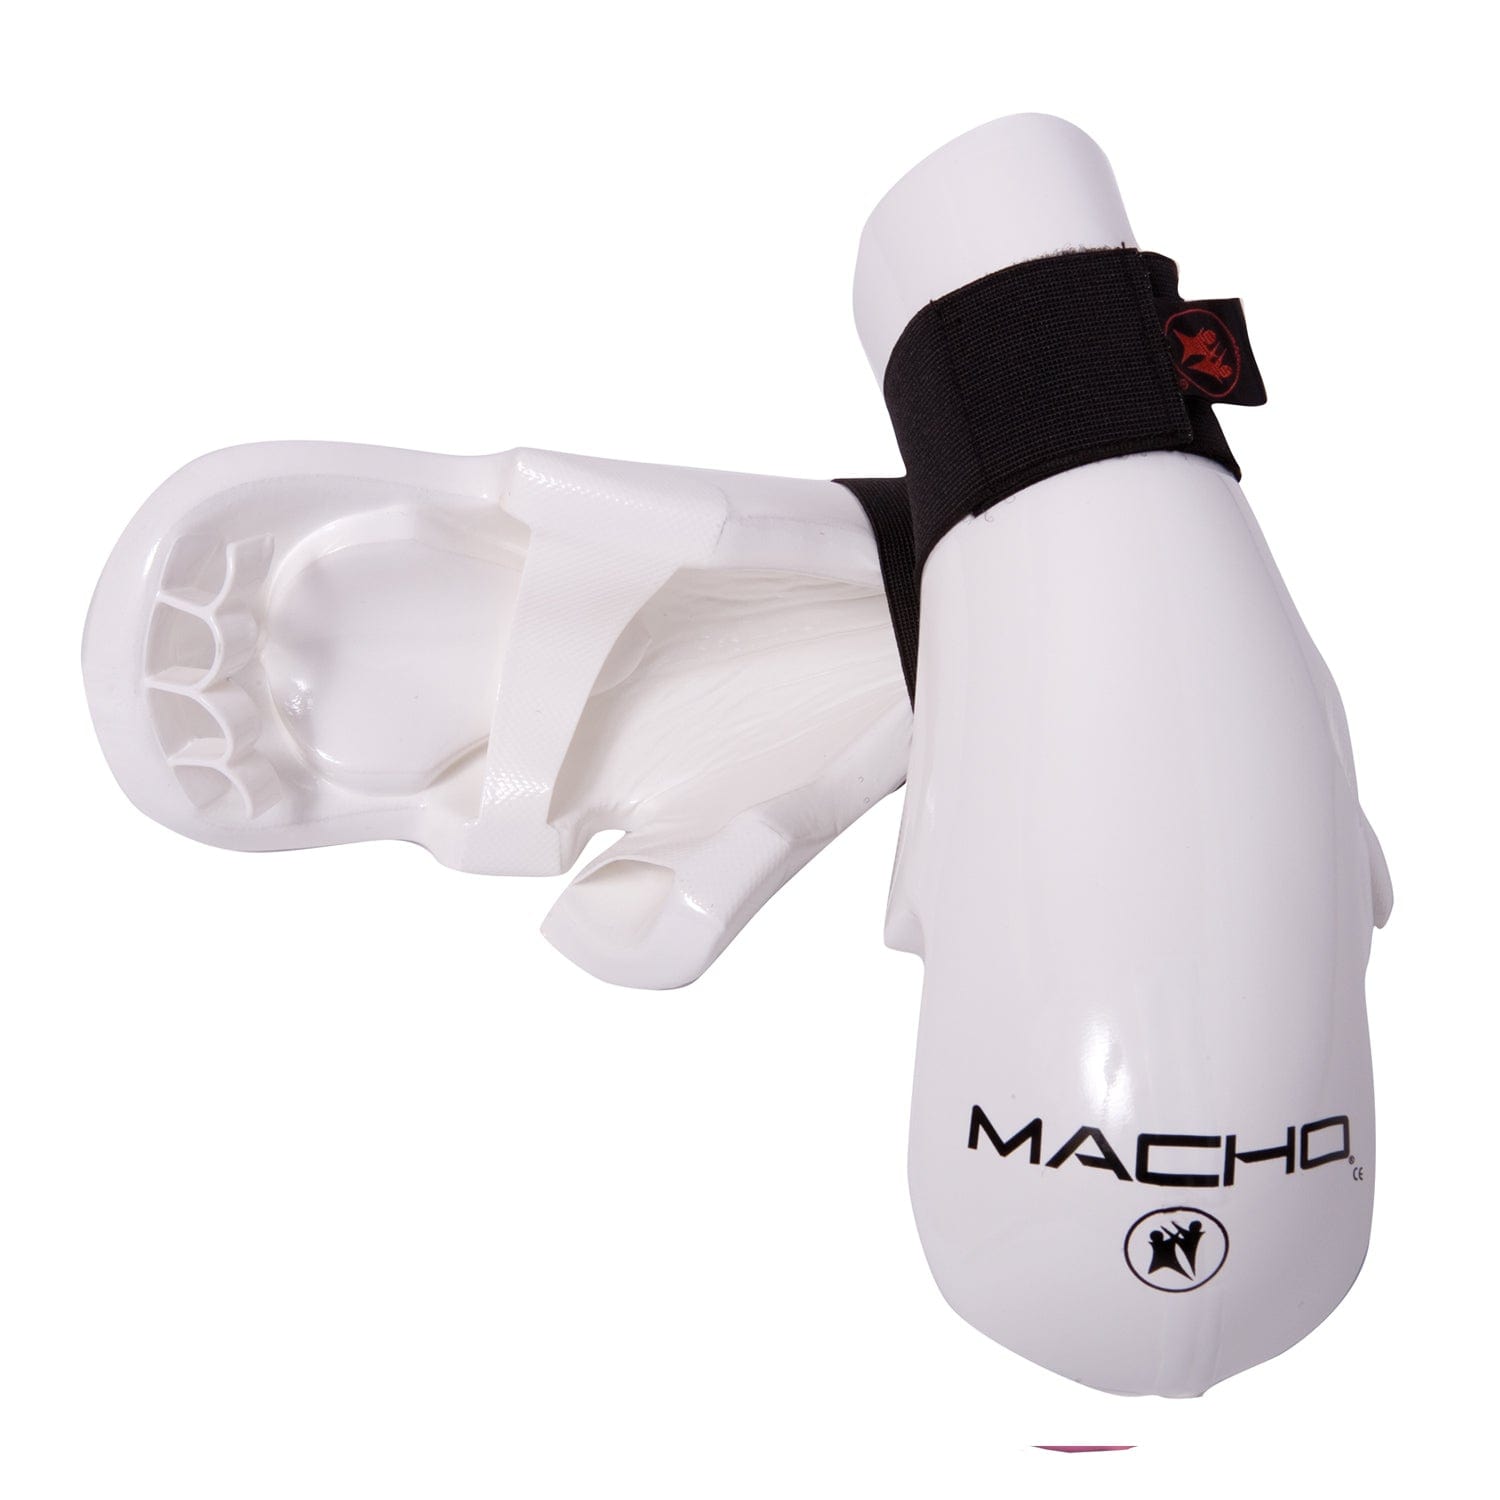 EclipseMartialArtsSupplies sporting goods white / child s MACHO DYNA PUNCH martial arts sparring gloves